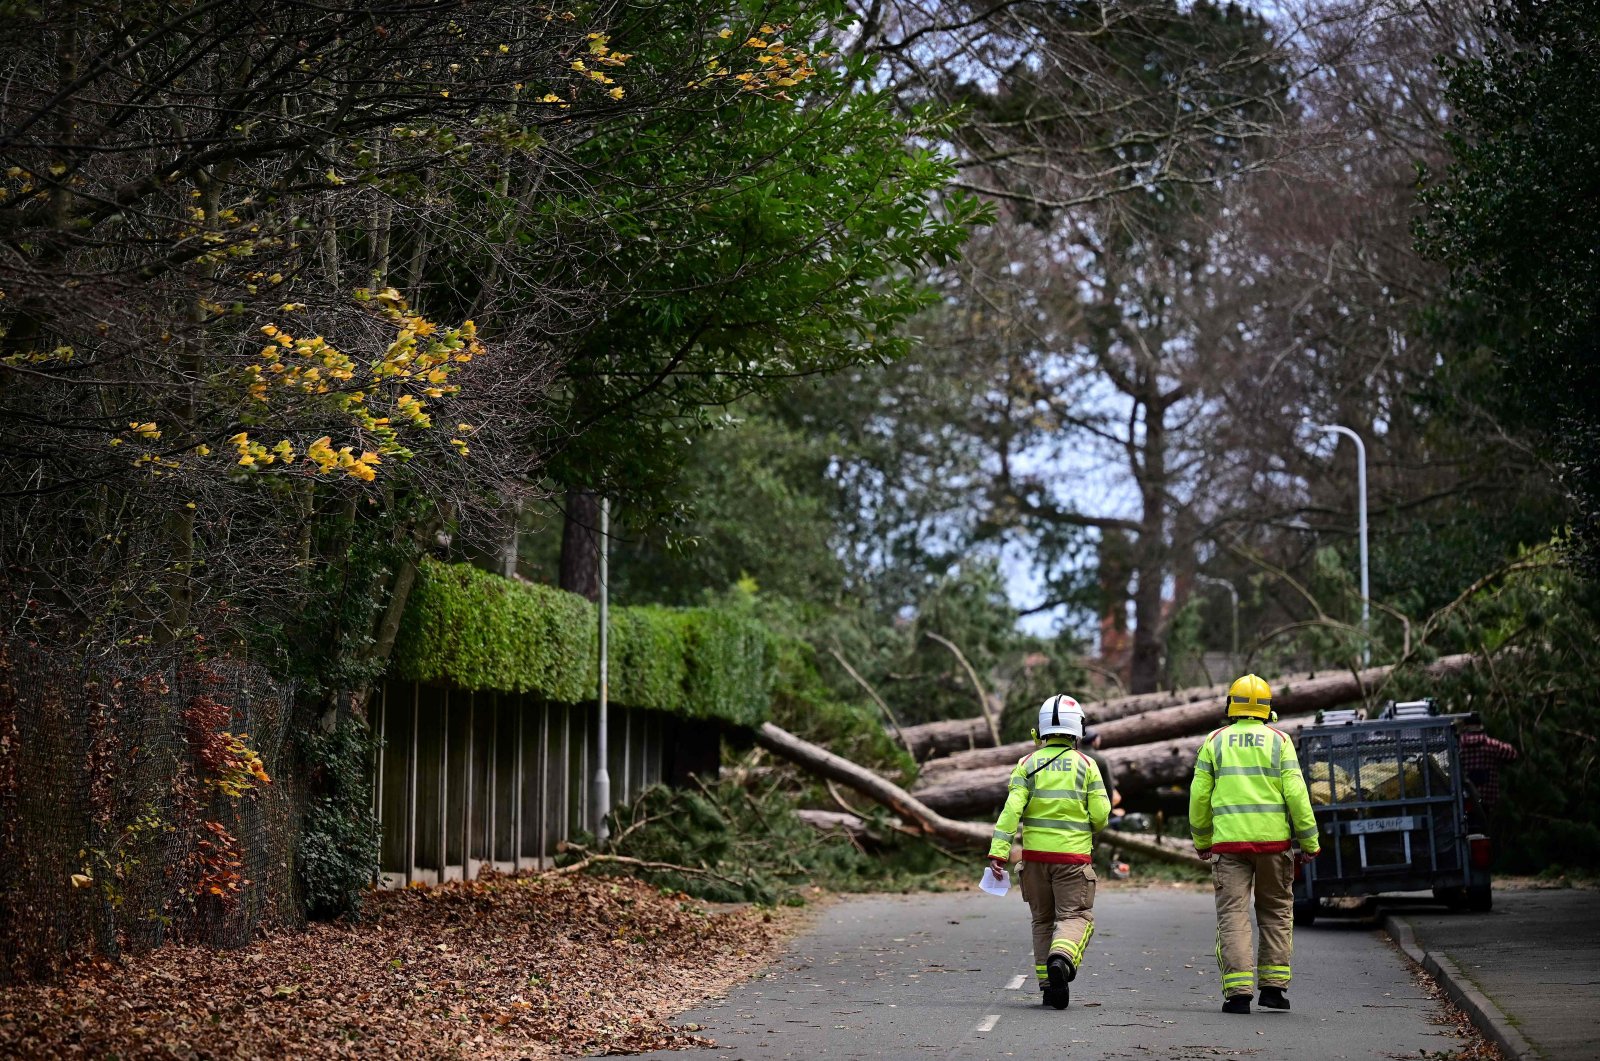 Firefighters arrive to inspect the damage as residents clear branches from a fallen tree in Birkenhead, England, Nov. 27, 2021. (AFP Photo)